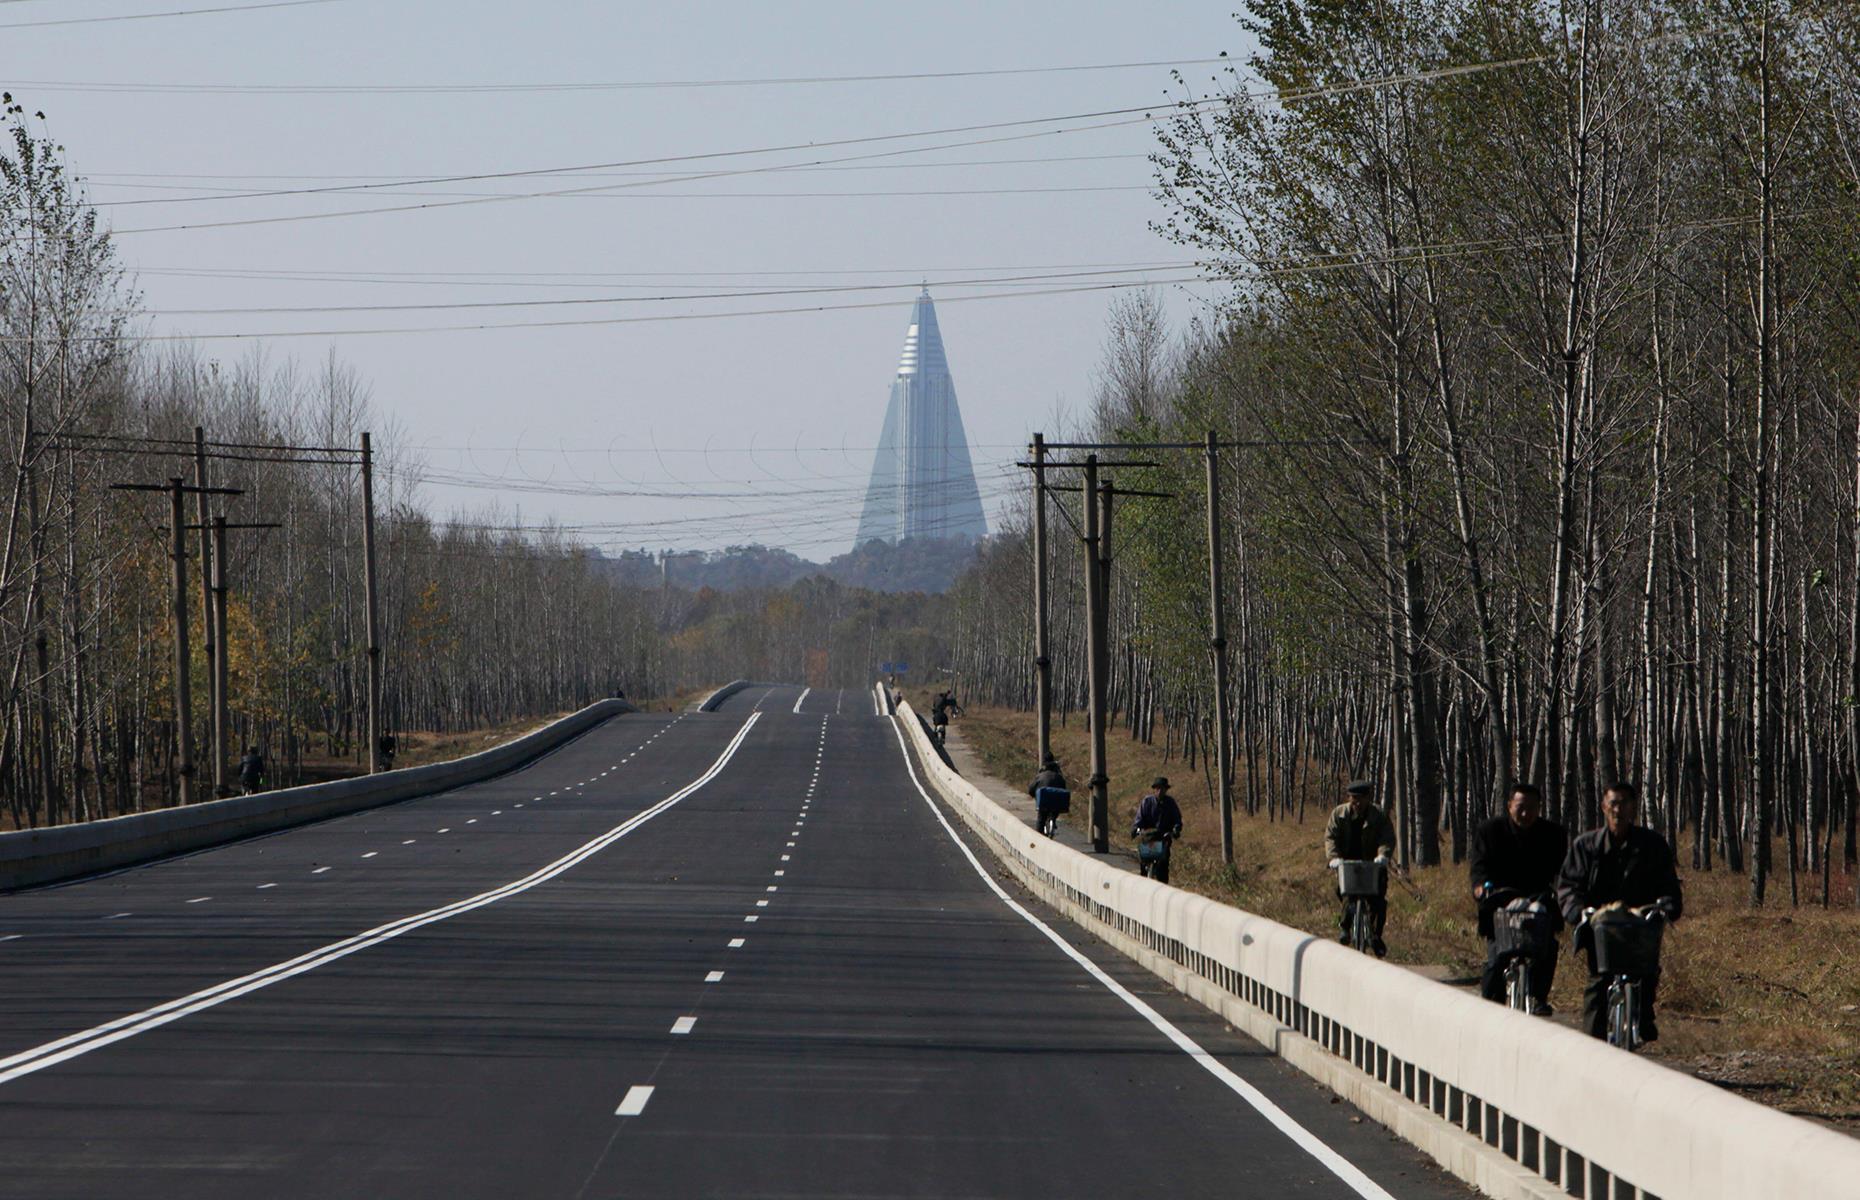 <p>The skyscraper is so much taller than the rest of Pyongyang that it can be seen for miles outside it – here it is pictured in 2011 on a road leading into the city. The hotel was named after a historic nickname for Pyongyang, meaning 'capital of willows'. It was apparently intended to resemble the shape of a willow too, but the retro Soviet design made it look more like a rocket or a missile, leading local guides to sometimes humorously refer to it as 'the missile launch pad'.</p>